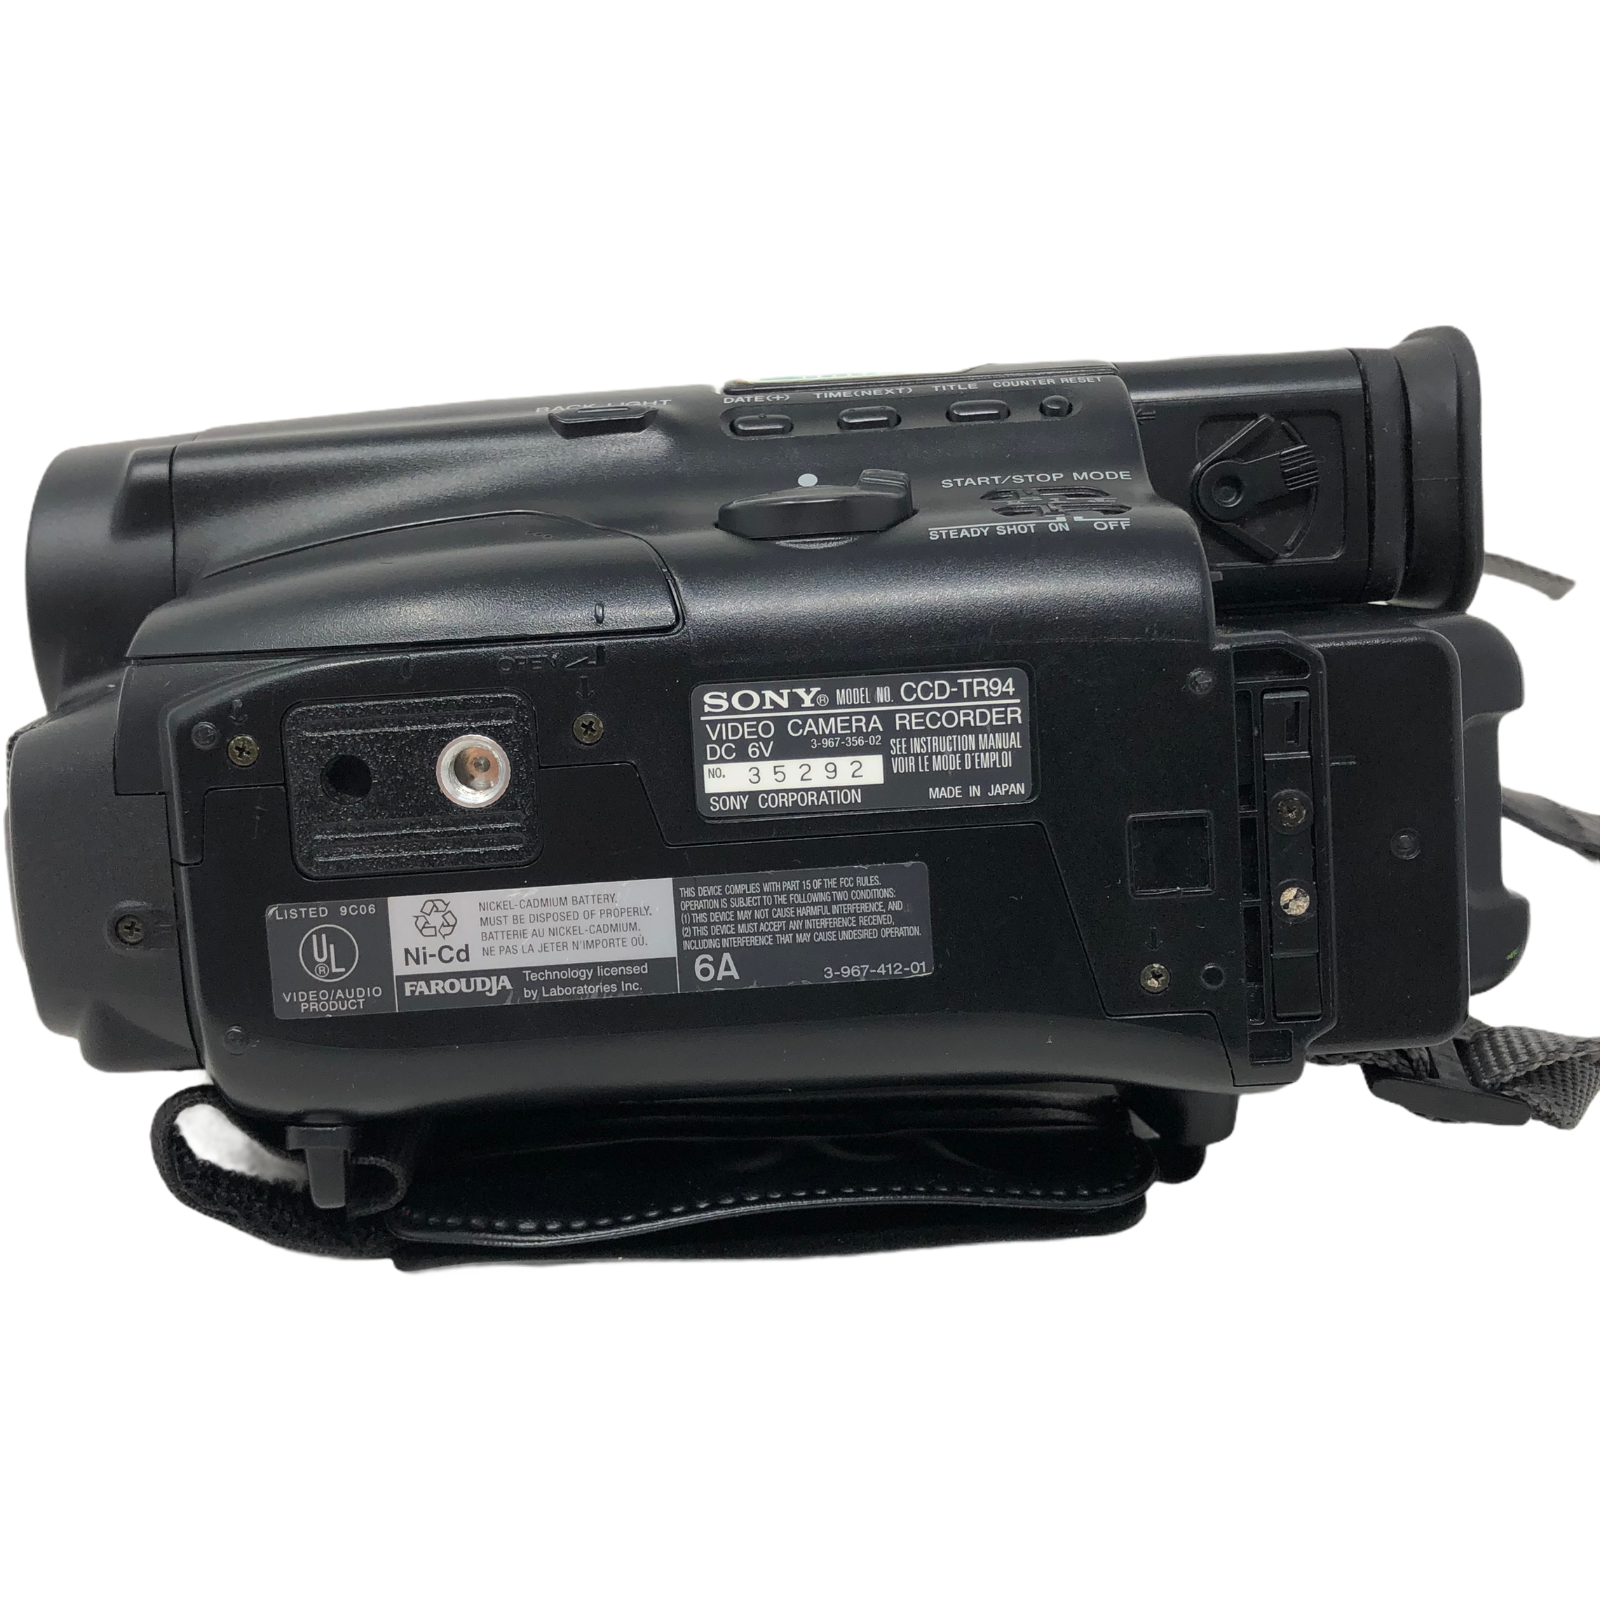 Sony CCD-TR94 Video 8 Black Camcorder 8mm and similar items